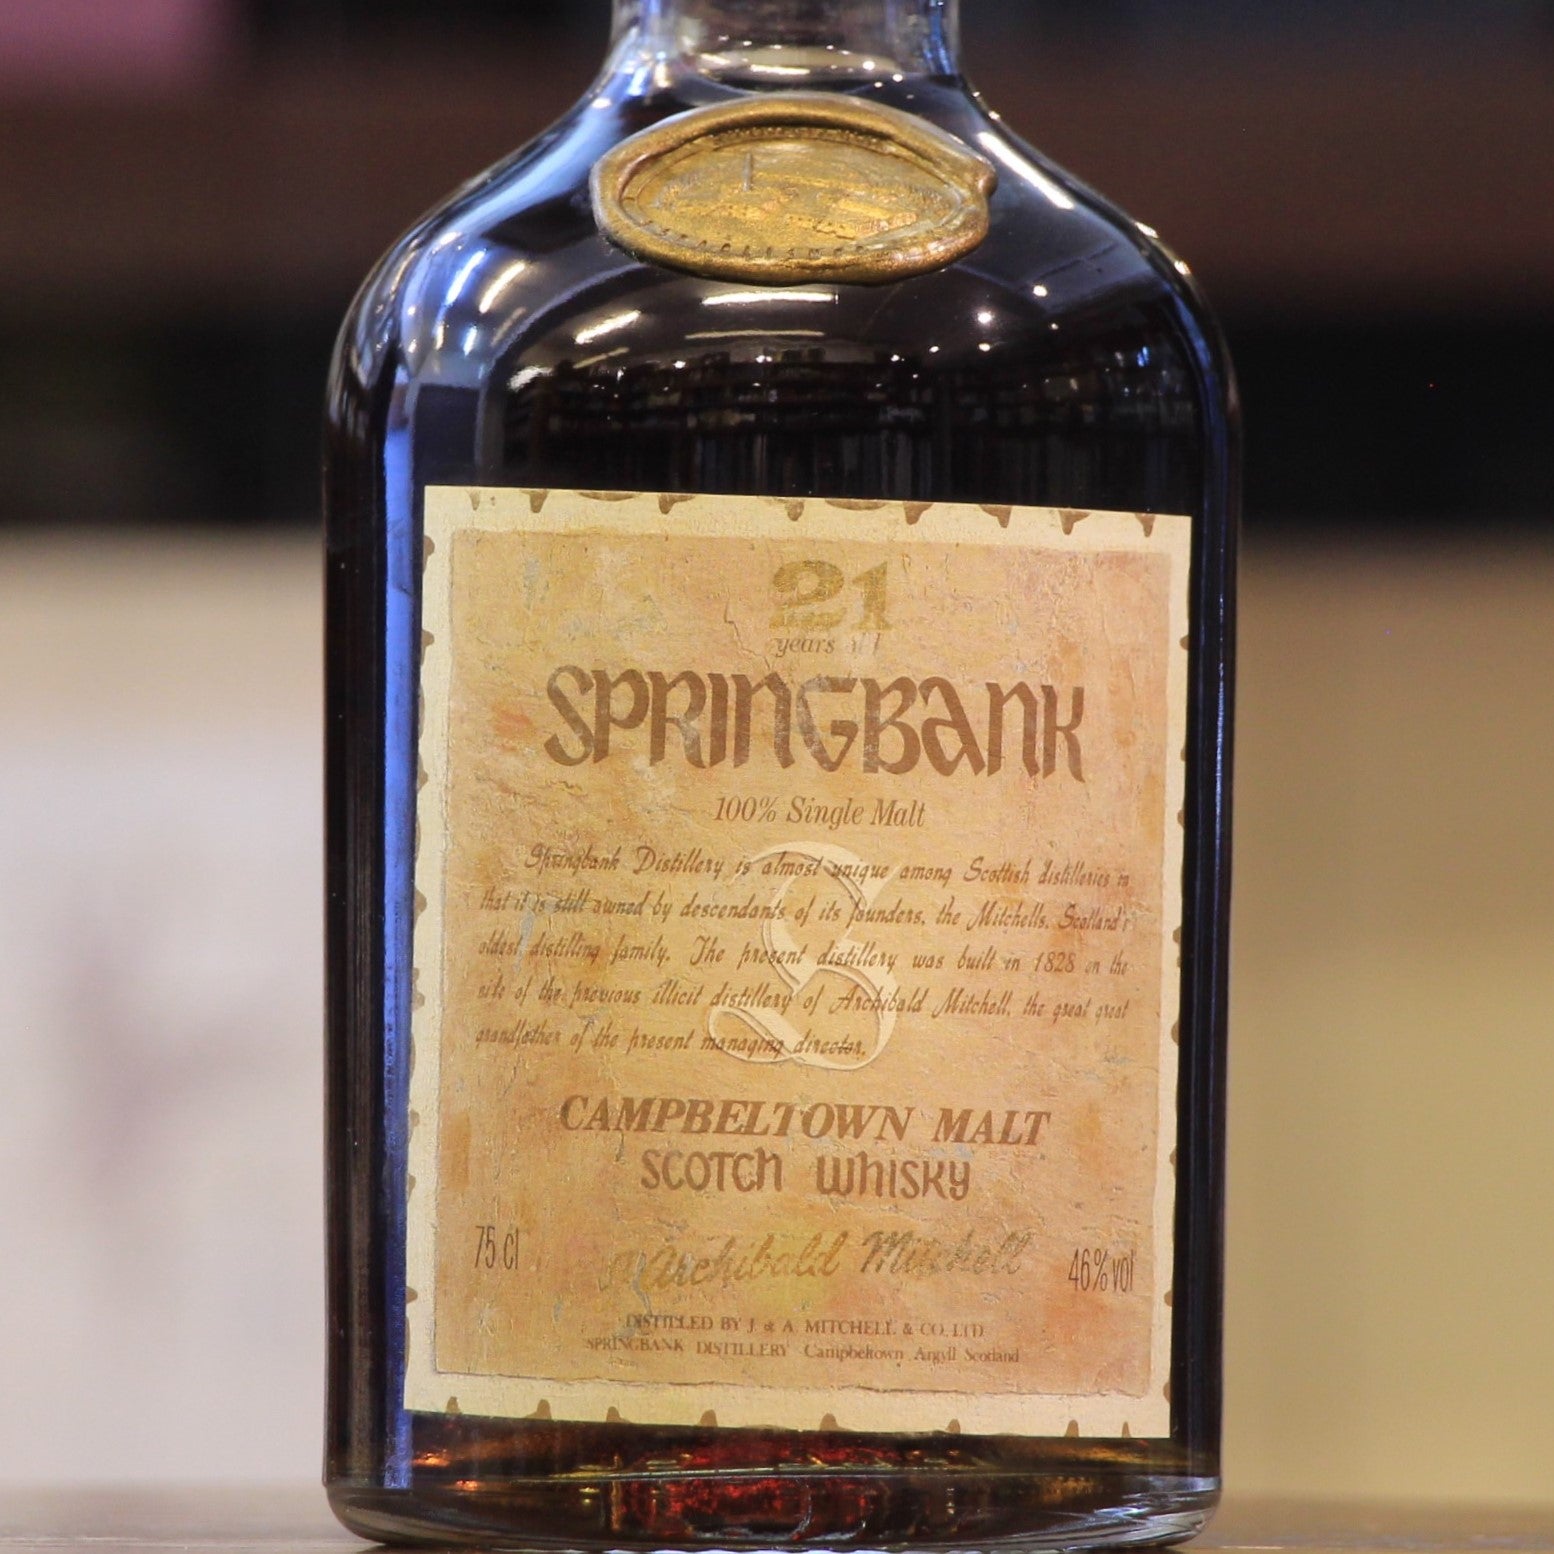 A 21-year-old bottle of Springbank presented in a dumpy bottle for Italian importer Consorzio Vinicolo. Estimated to be bottled in the 1980s, this bottling offers sherry sweet and fruity flavours with some notes of vanilla and old rum, long and spicy finish. Scored 5 stars on Whiskyfun (91 points). 